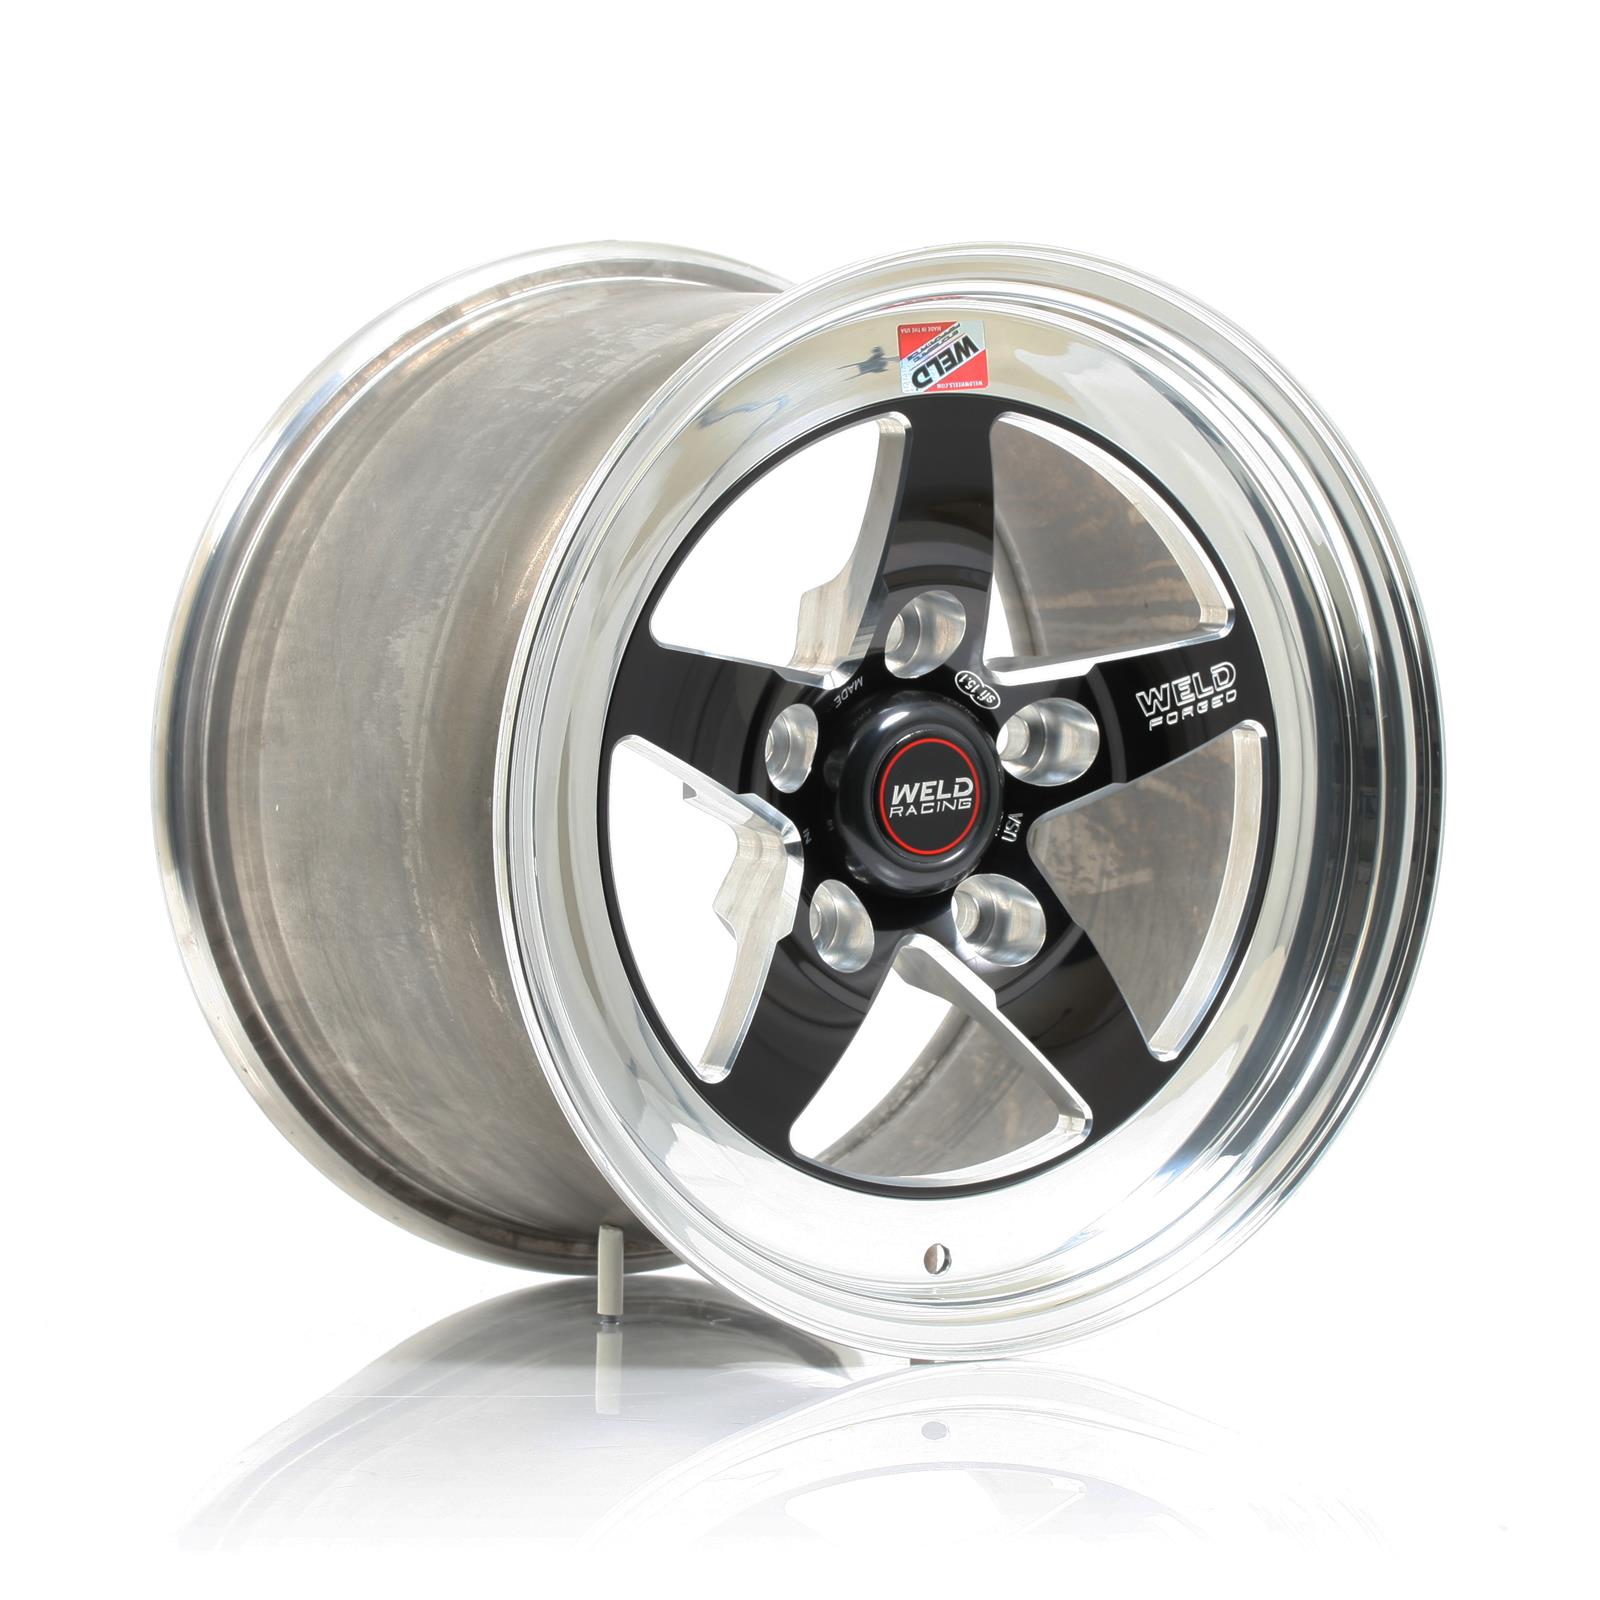 Weld Racing RT-S S71 Forged Aluminum Black Anodized Wheels - 17x10.5" w/7.8" Back Spacing